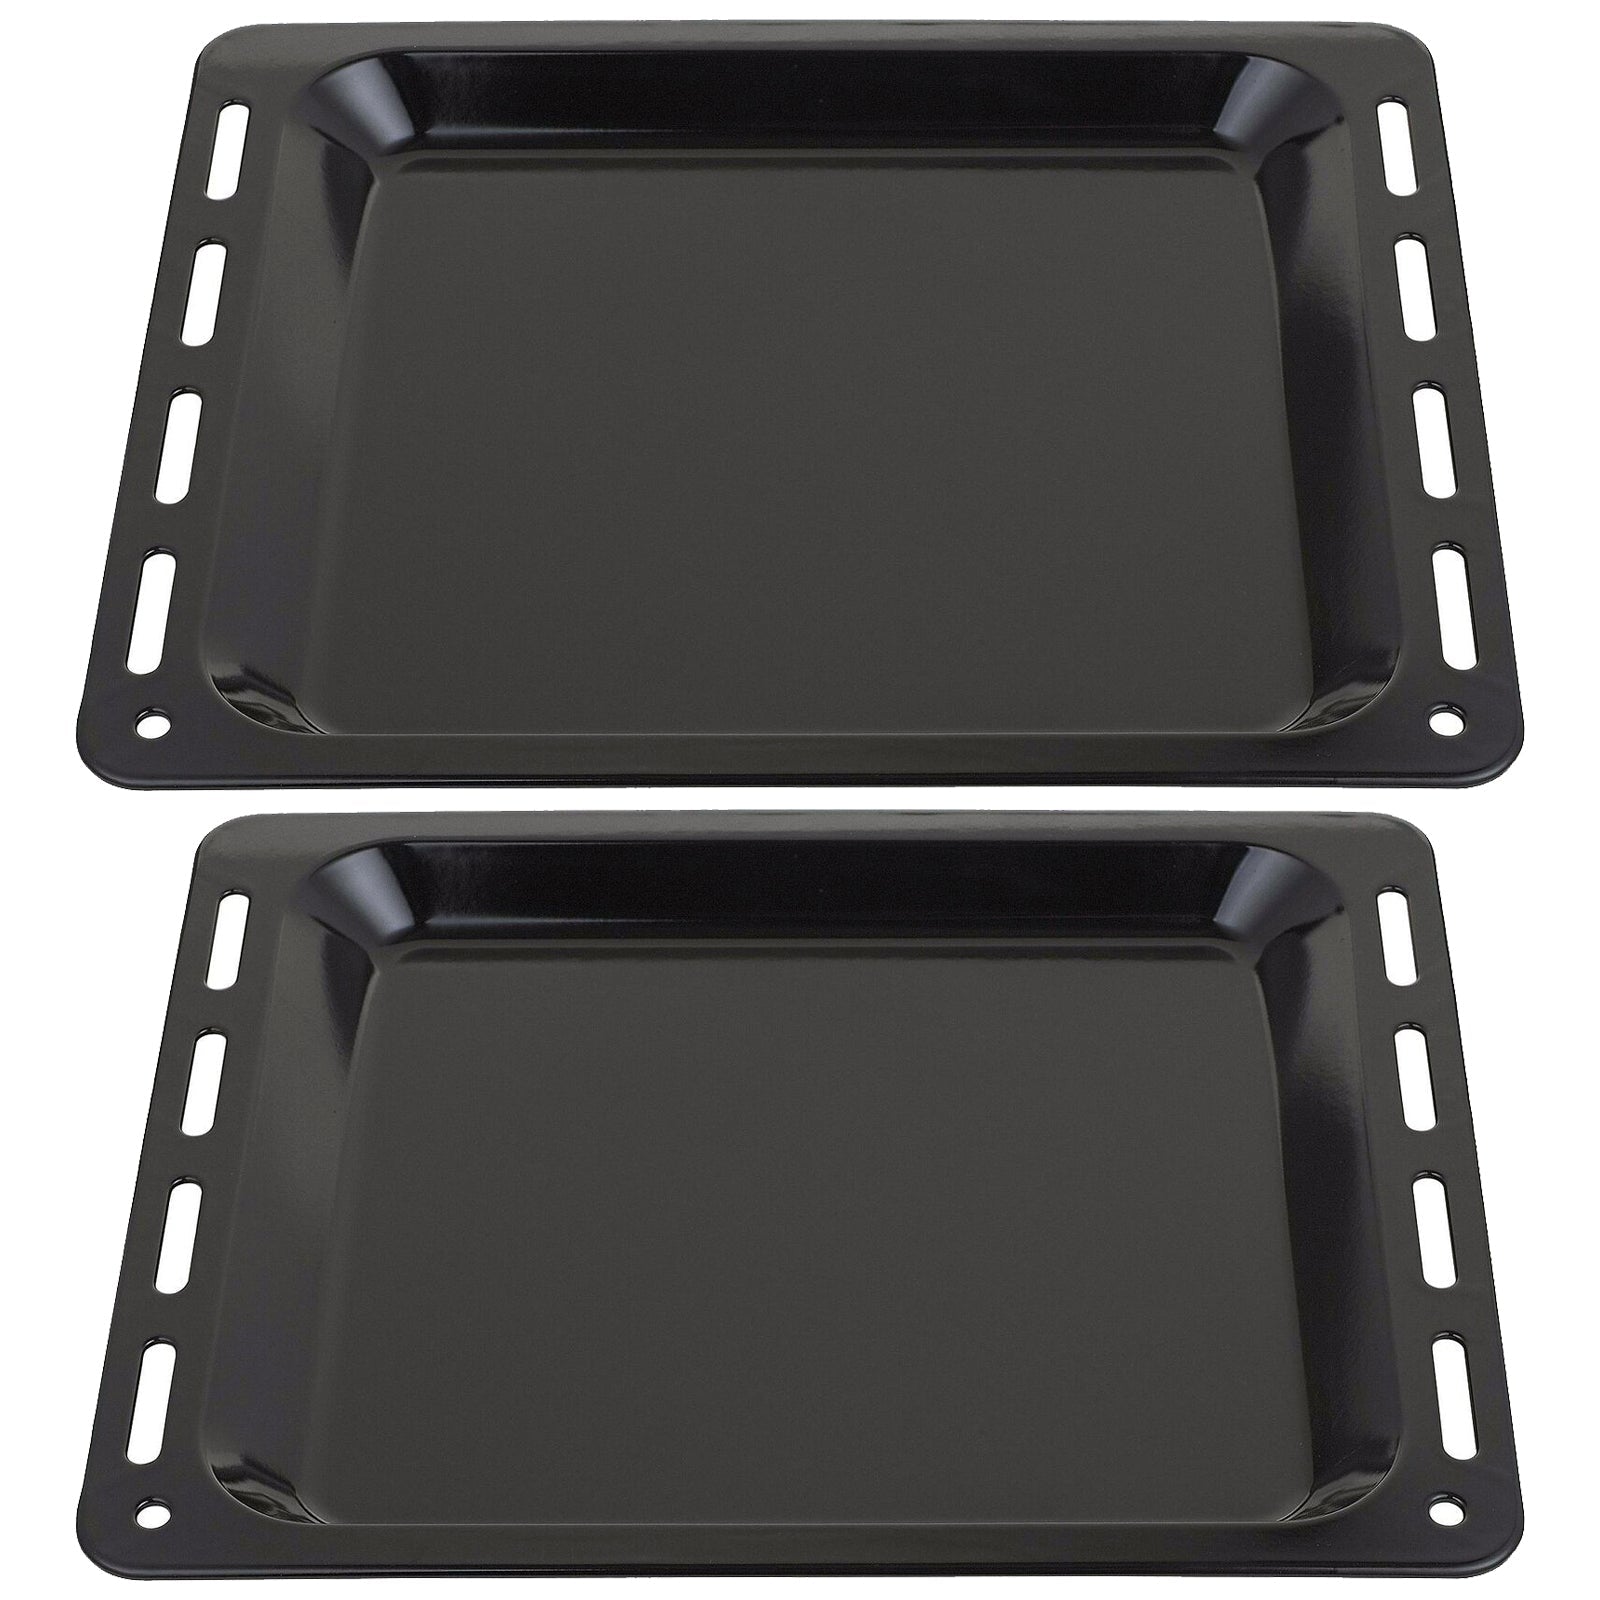 Baking Tray Enamelled Pan for Siemens Oven Cooker (448mm x 360mm x 25mm, Pack of 2)